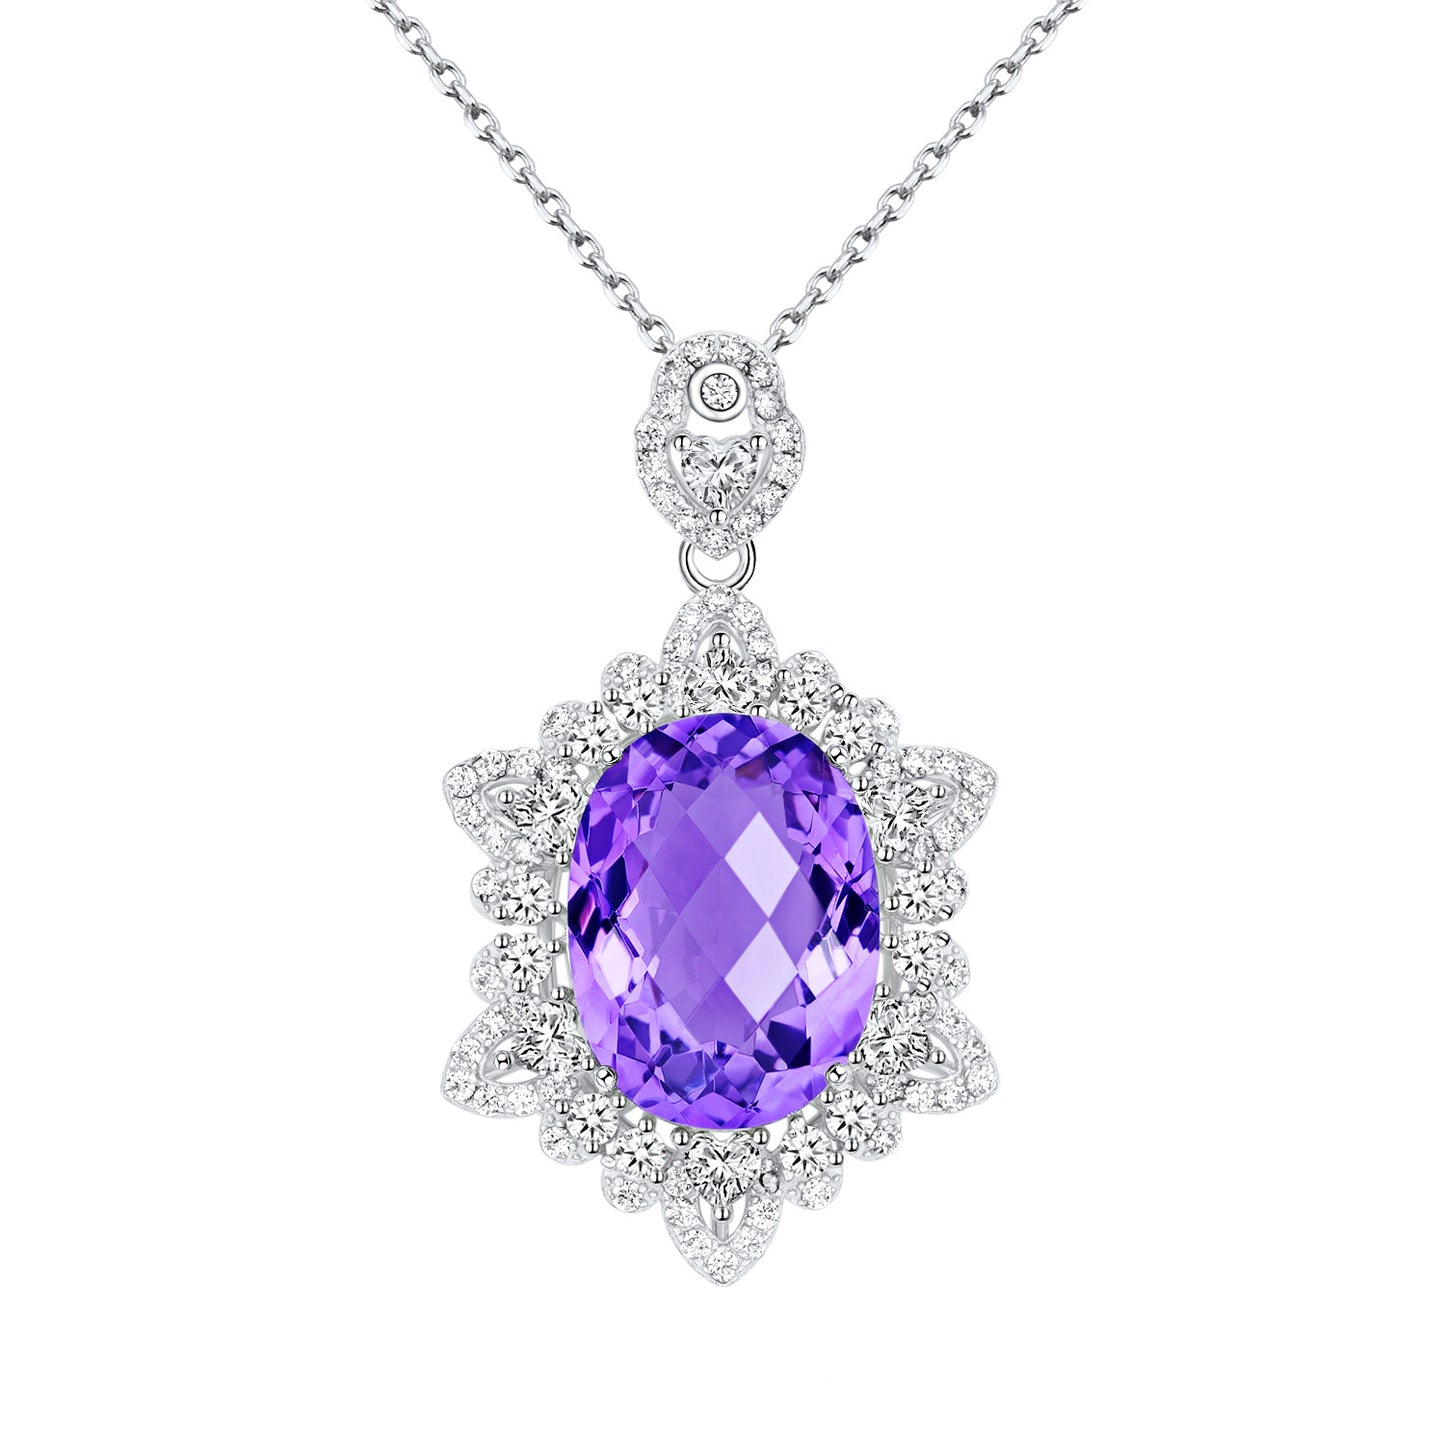 Natural Amethyst Necklace Women's 925 Silver